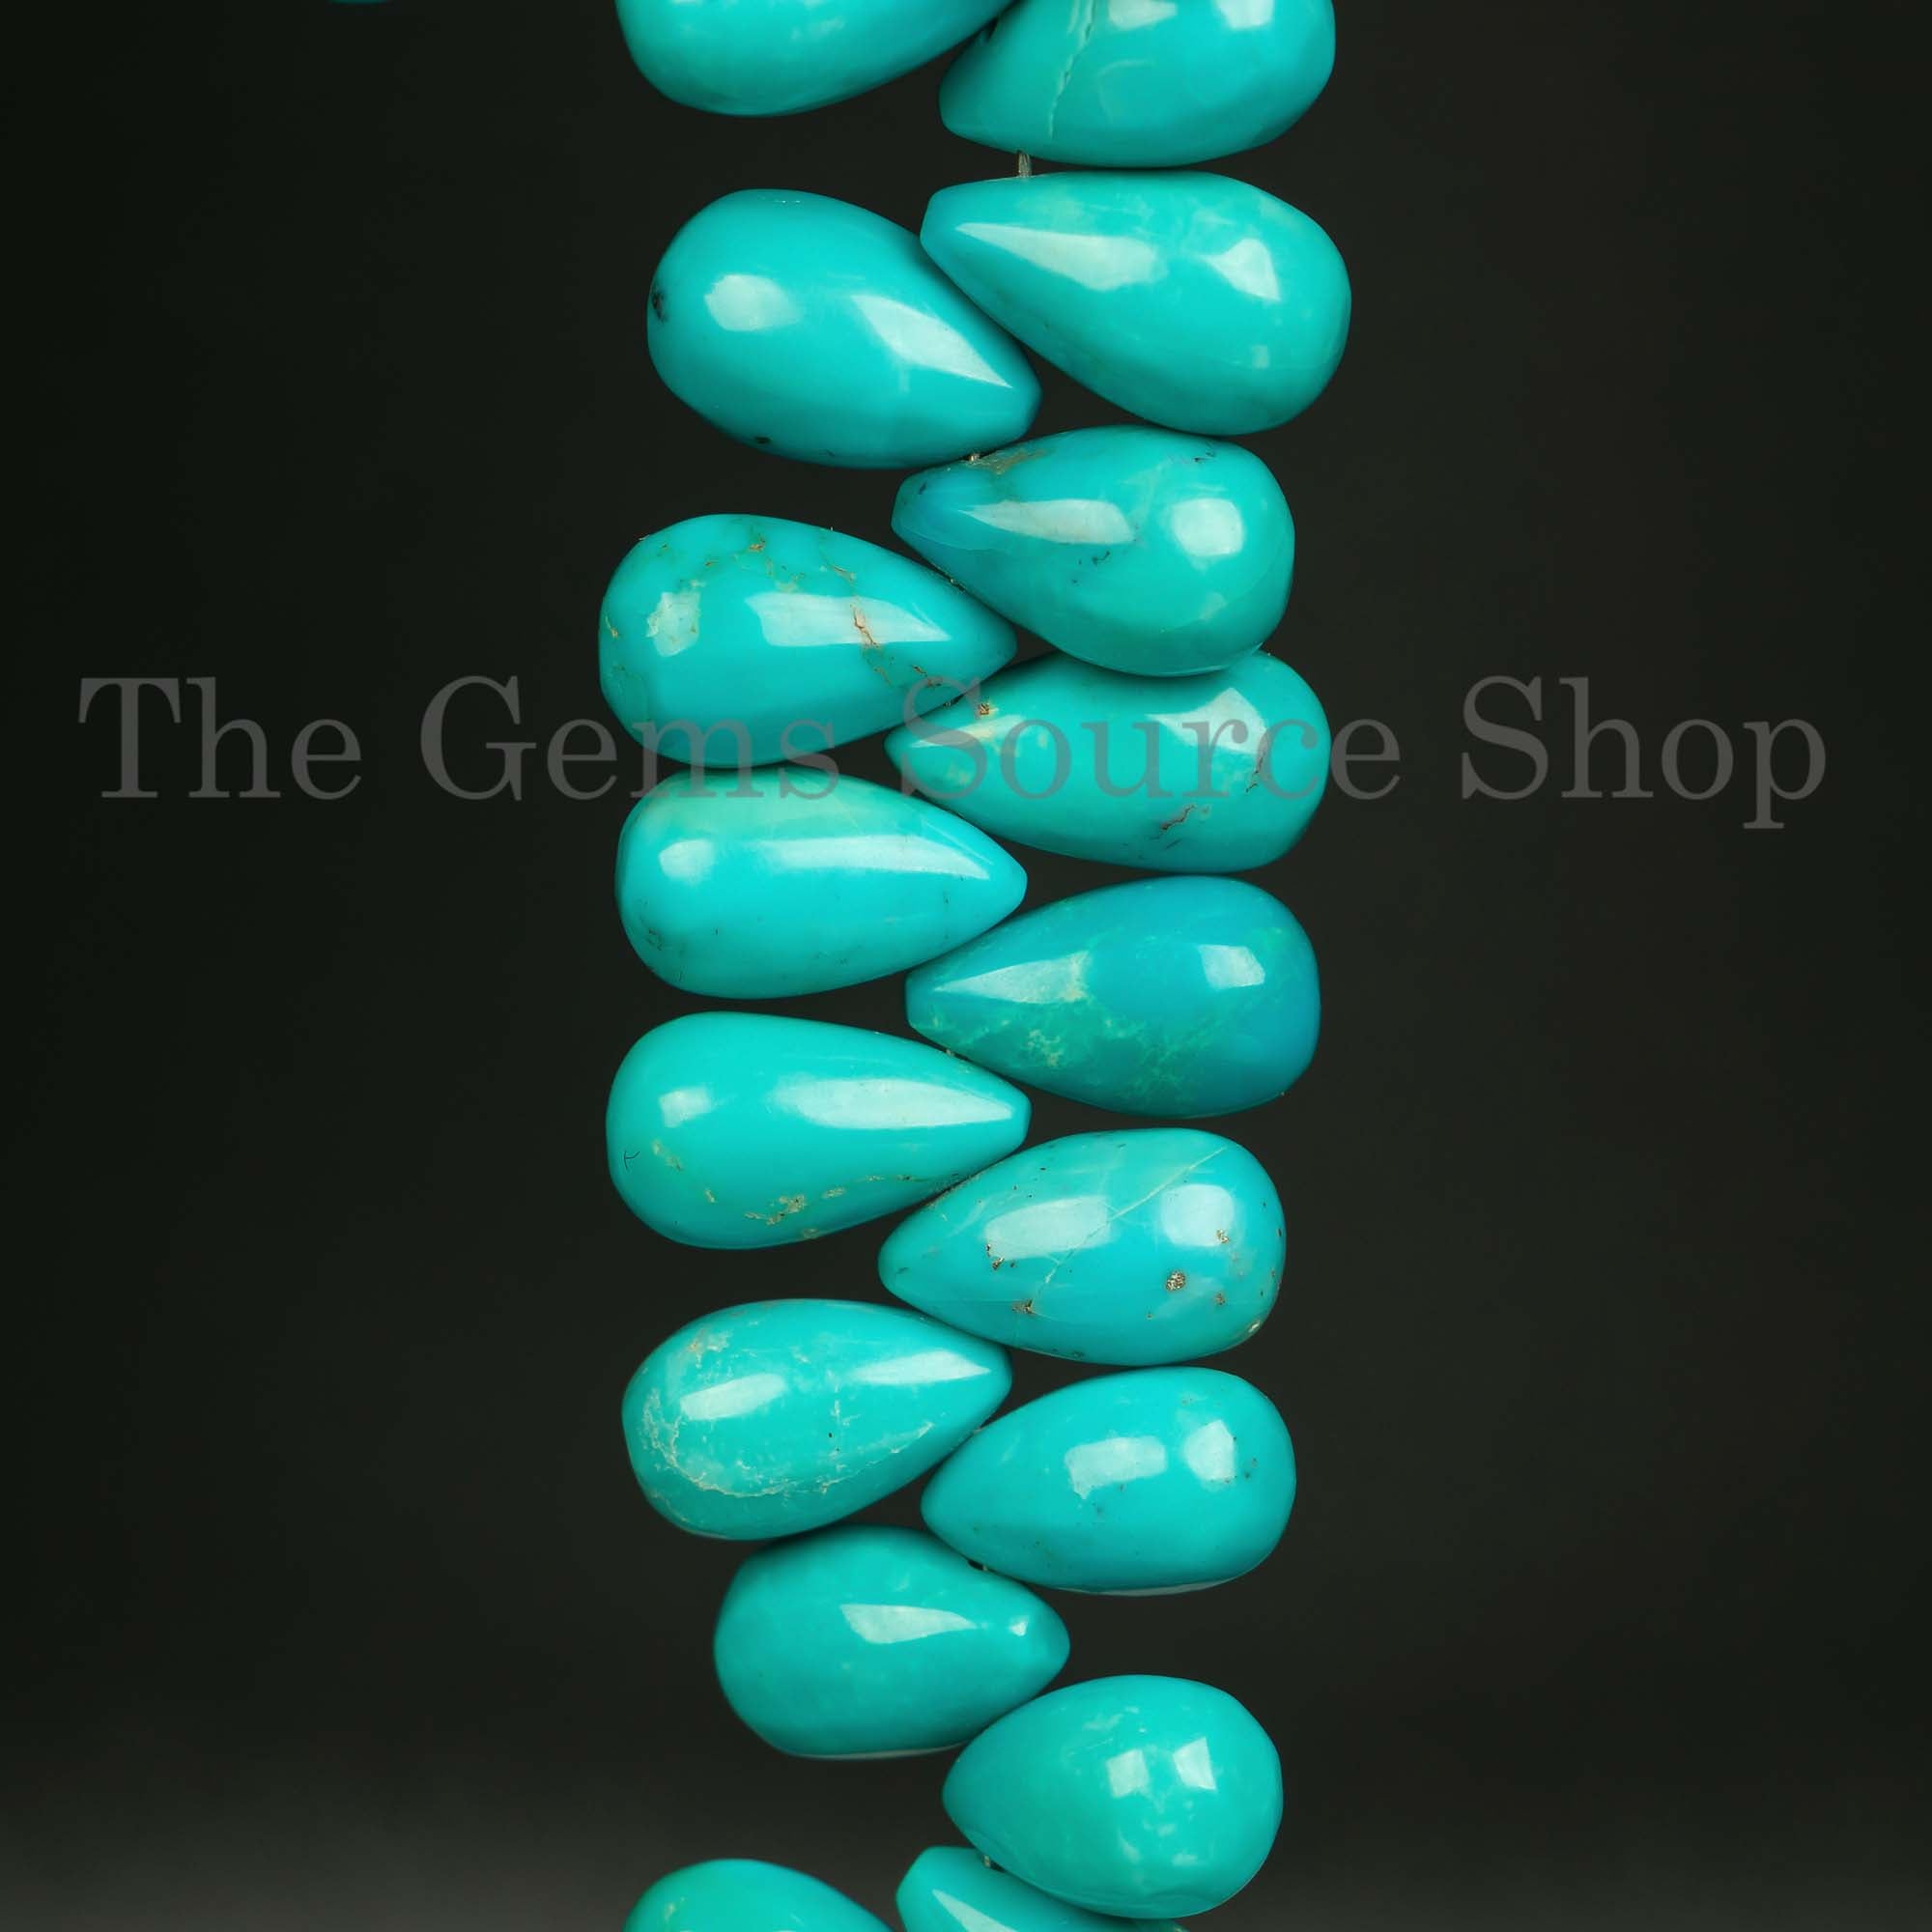 Natural Turquoise Beads, Turquoise Smooth Beads, Turquoise Drops Shape Beads, Wholesale Beads